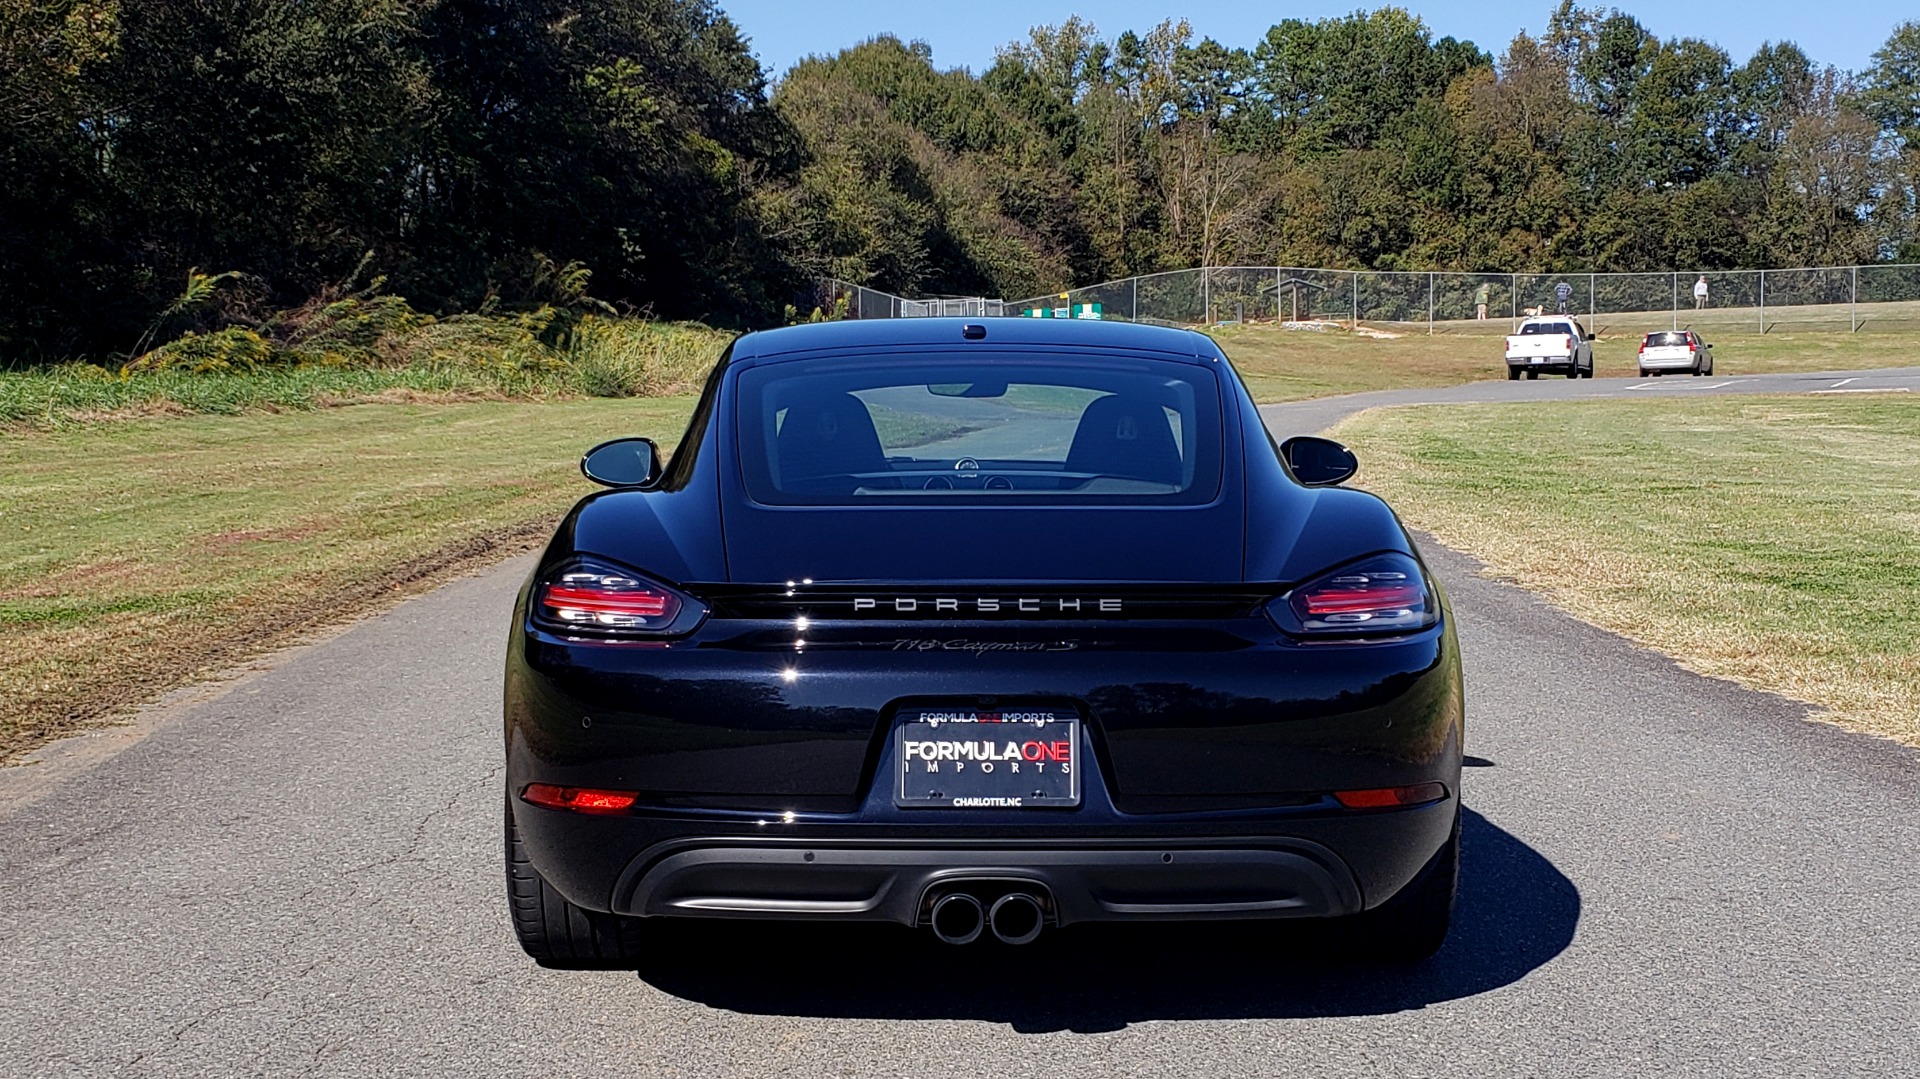 Used 2019 Porsche 718 CAYMAN S COUPE / PDK TRANS / LCA / BOSE / HTD STS / LIGHT DESIGN PKG for sale Sold at Formula Imports in Charlotte NC 28227 12